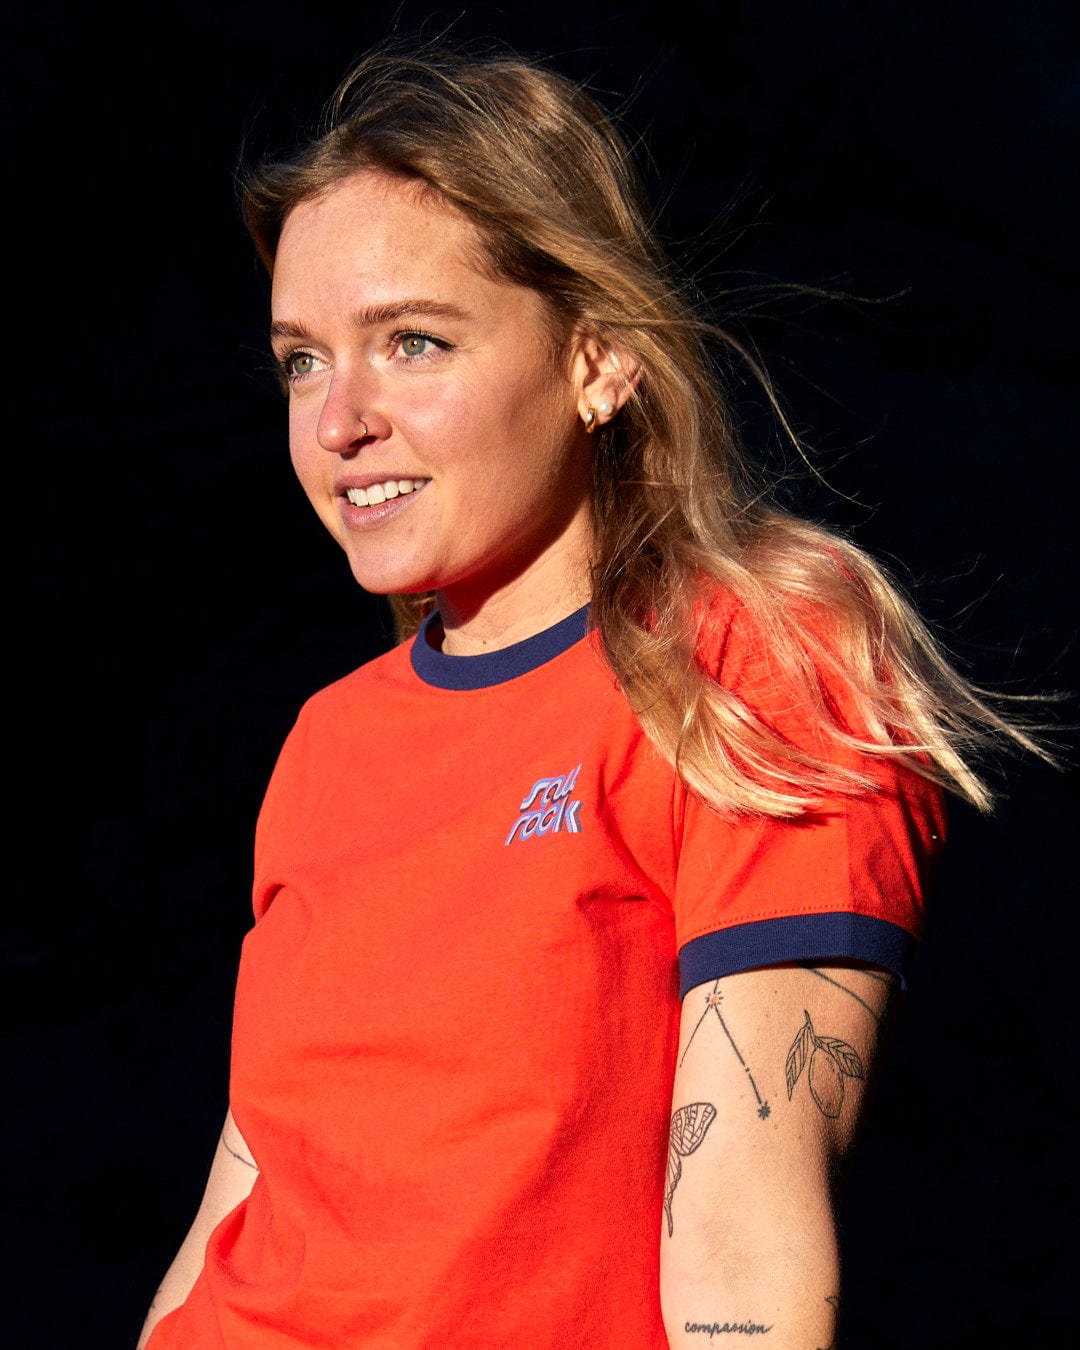 A woman in an orange t-shirt showcasing Saltrock branding with tattoos is wearing the Retro Wave Mini - Womens Short Sleeve T-Shirt in Red by Saltrock.